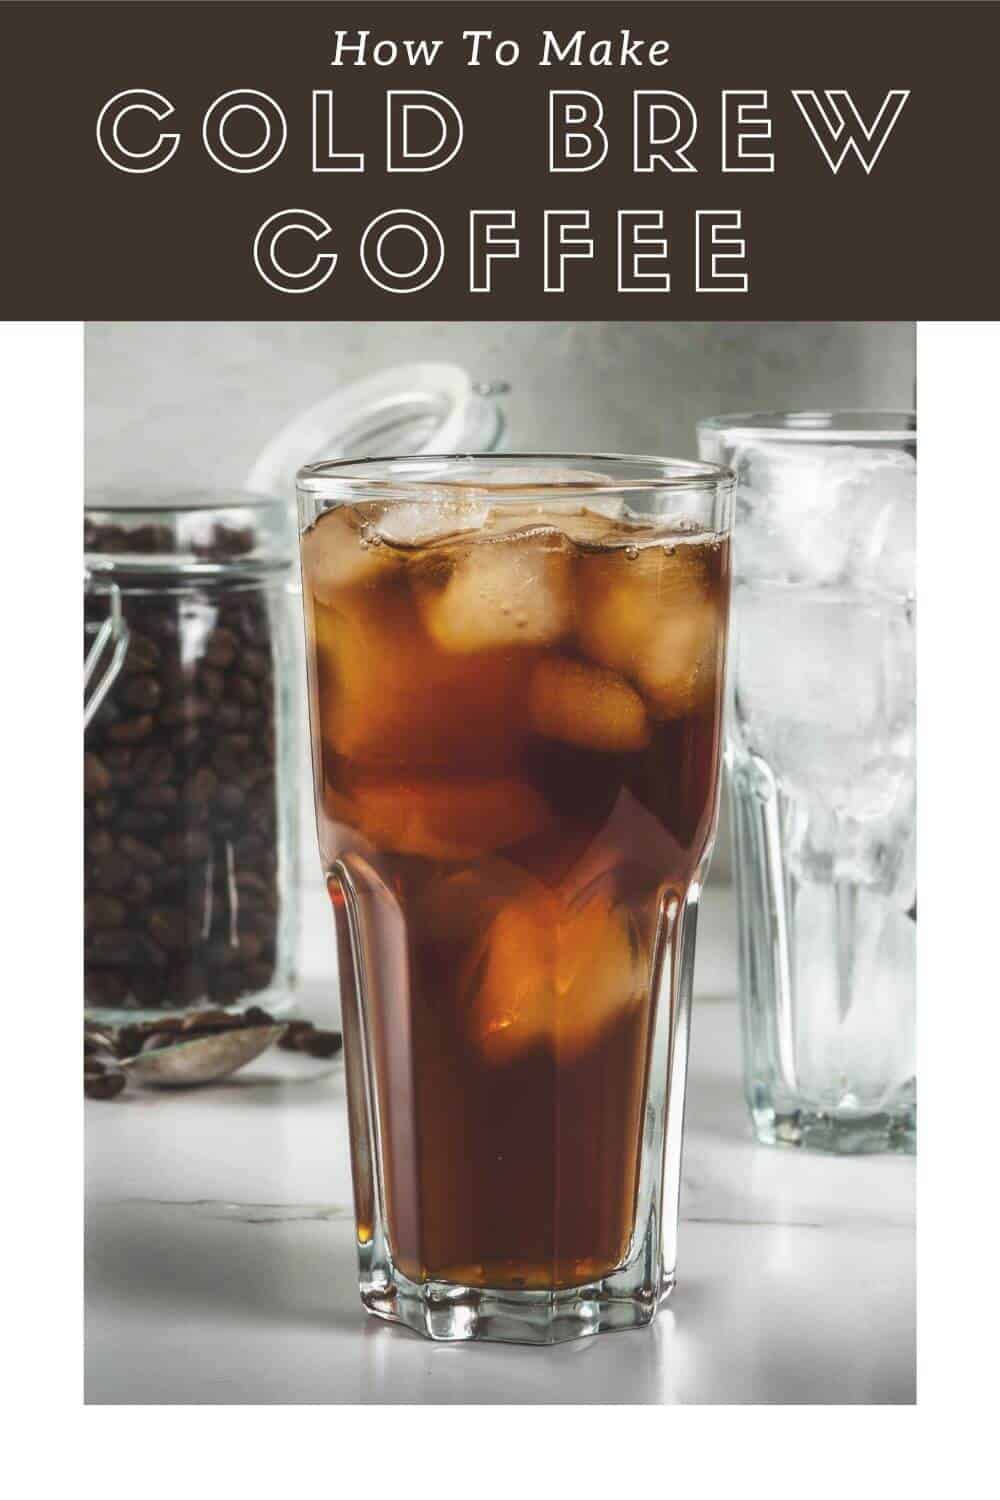 Cold brew coffee in ice with text overlay.